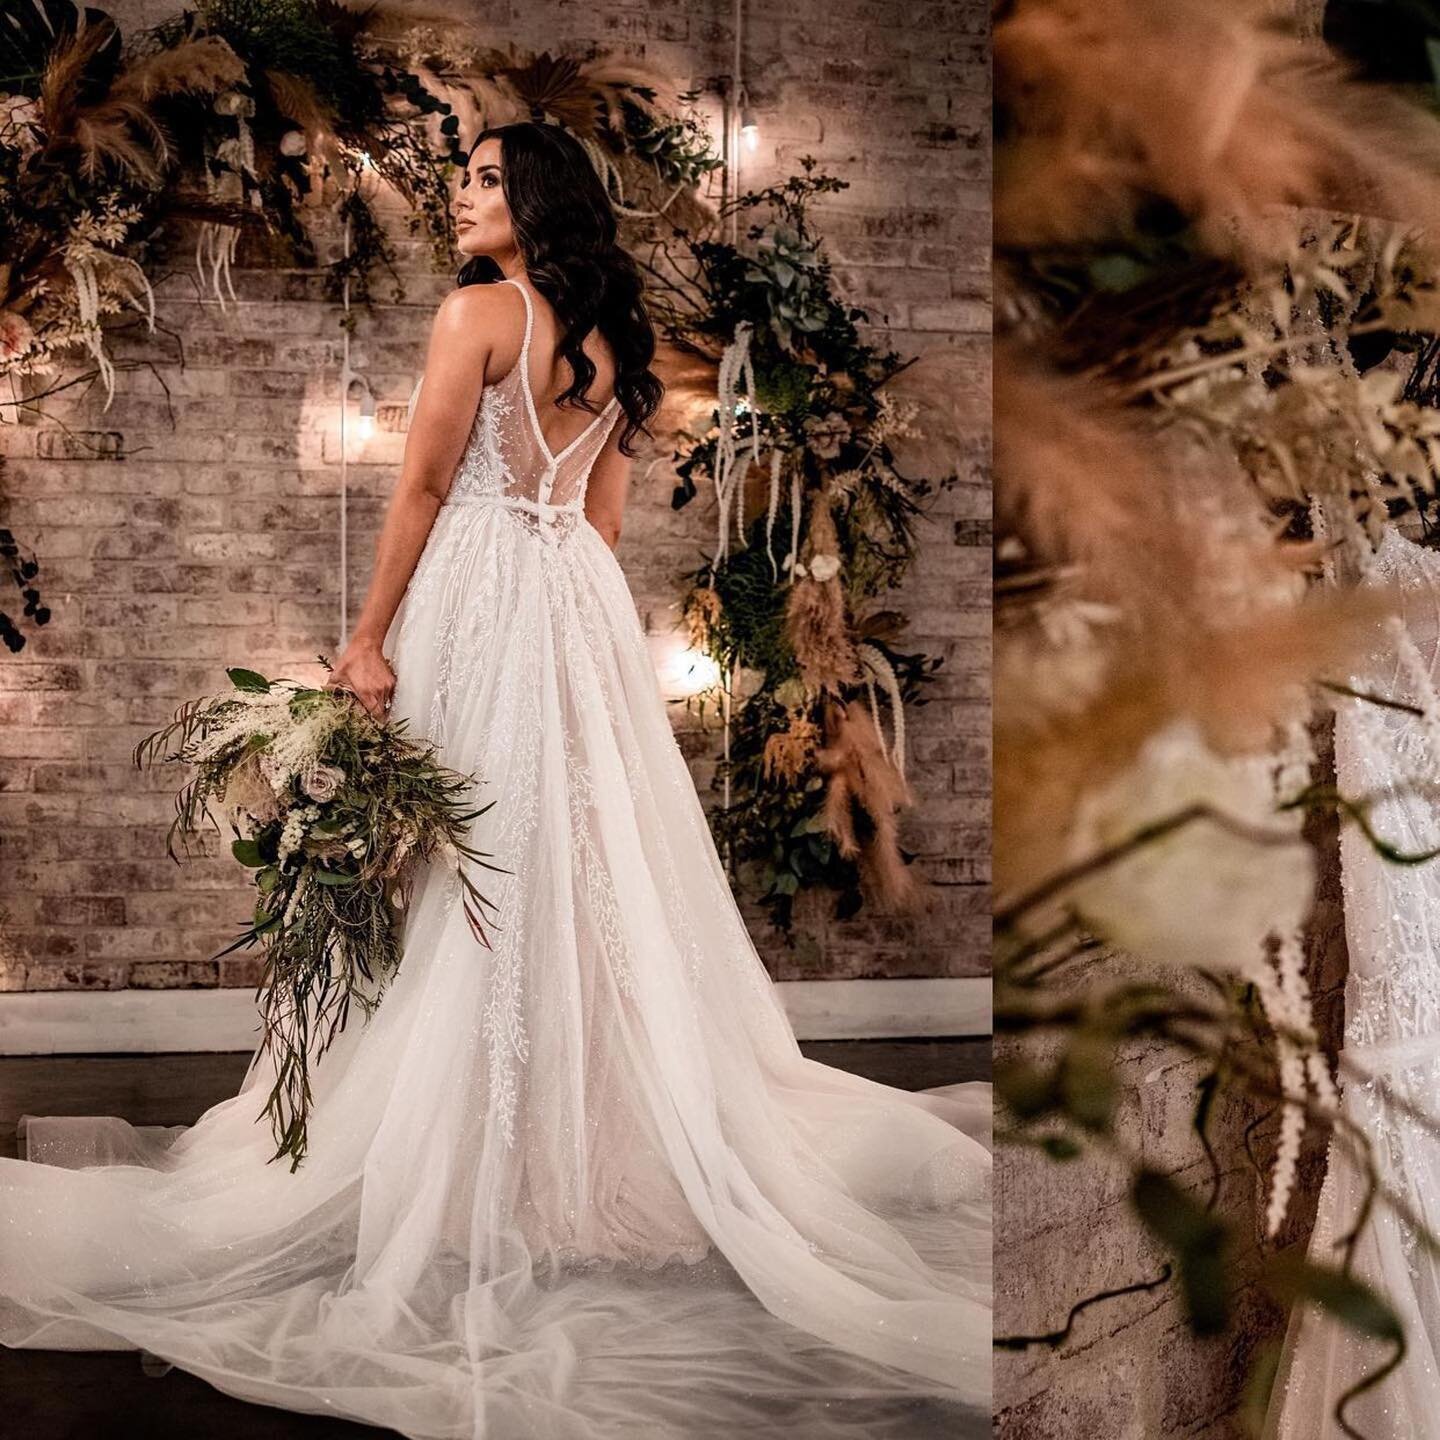 Seriously obsessing over our Fontana gown! Beautiful pictures to show the detail on the gown🥰
&bull;&bull;&bull;
Thank you @mtostaphotography for providing such incredible photos to Sunday&rsquo;s workshop!✨

・・・
Getting some indoor lighting practic